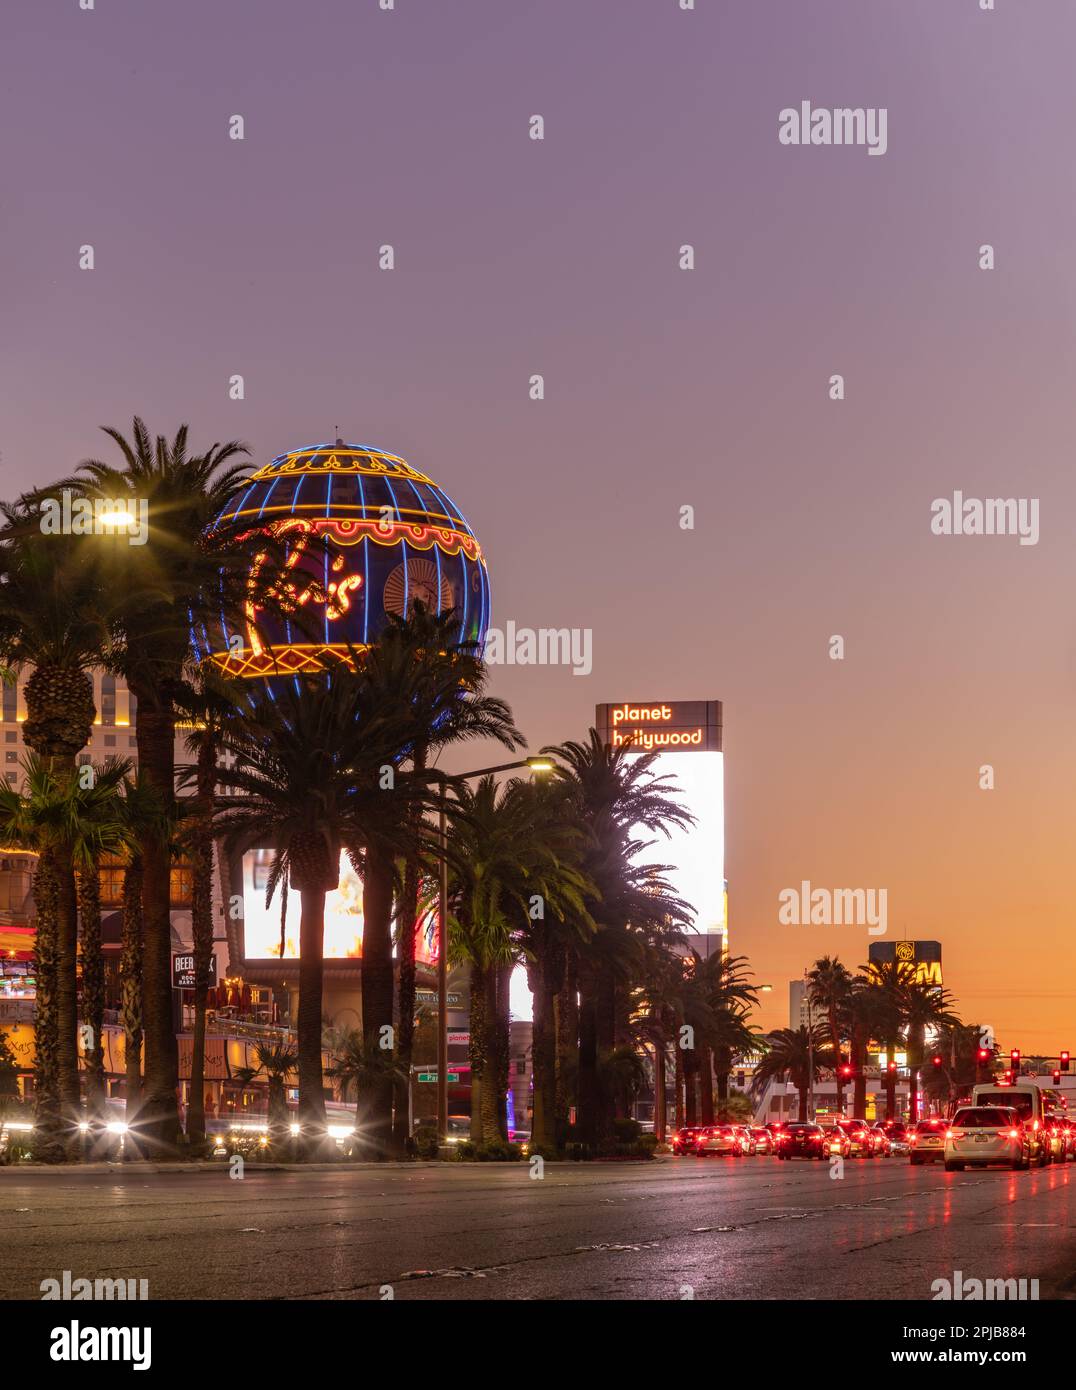 A picture of the Paris Las Vegas Balloon Sign and the Planet Hollywood Las Vegas Resort and Casino billboard at sunset. Stock Photo